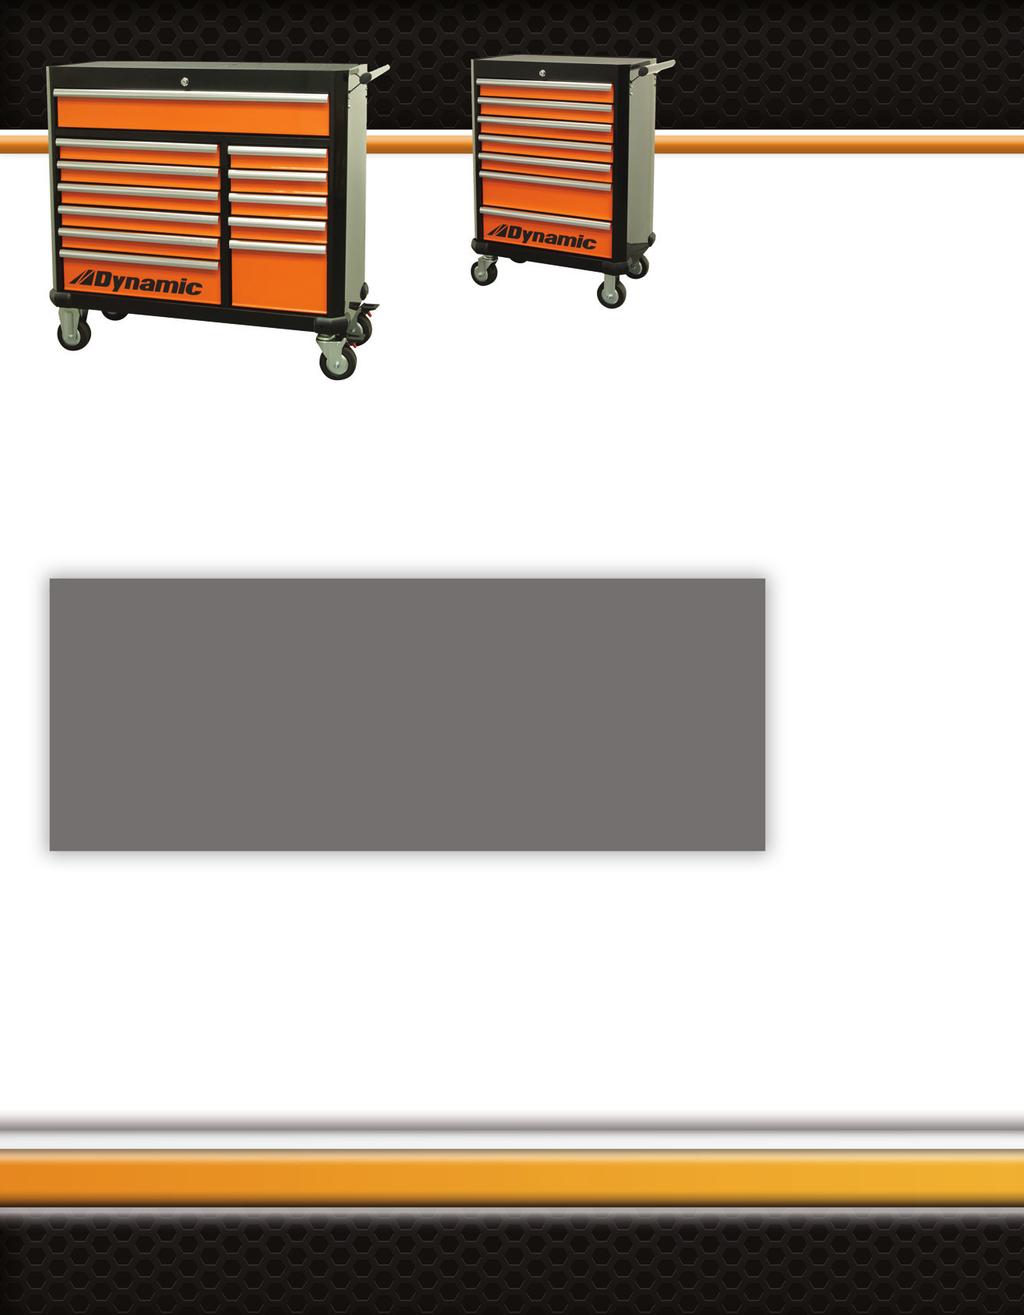 D069203 42 Roller Cabinet - 12 Drawers Load capacity per drawer is 88 lbs Net weight: 220 lbs 41 (h) x 42 (w) x 18 (d)